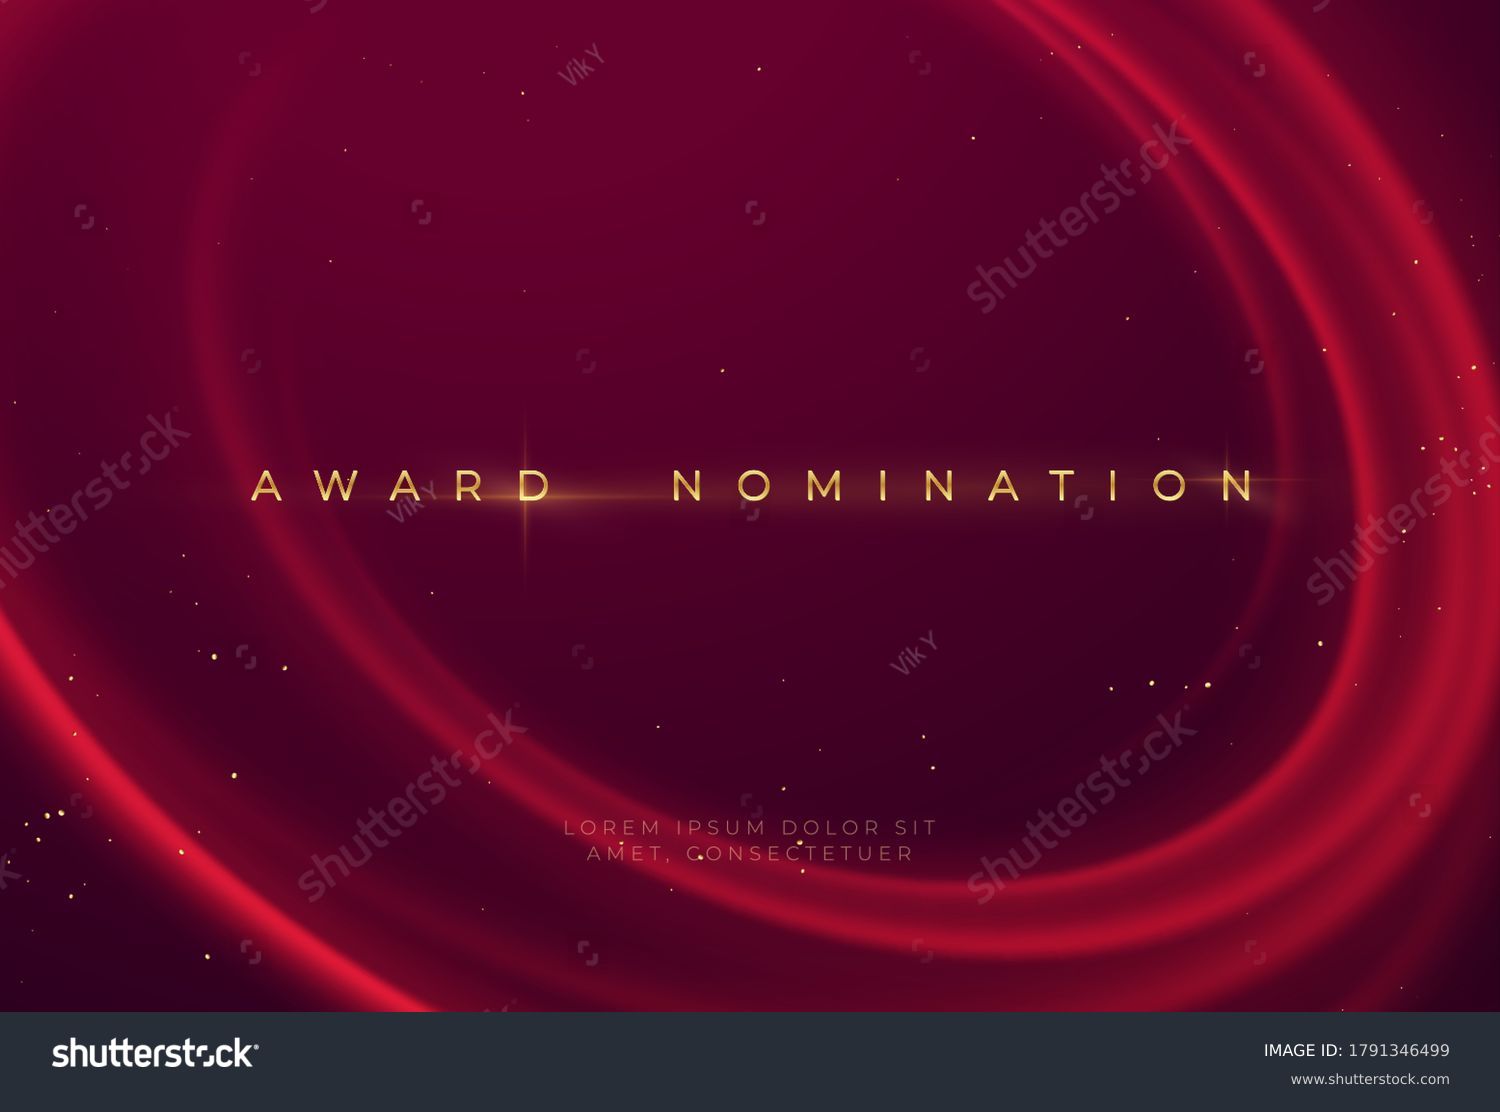 SVG of Award nomination ceremony with luxurious red wavy background with gold glitter and sparkle. Vector illustration EPS10 svg